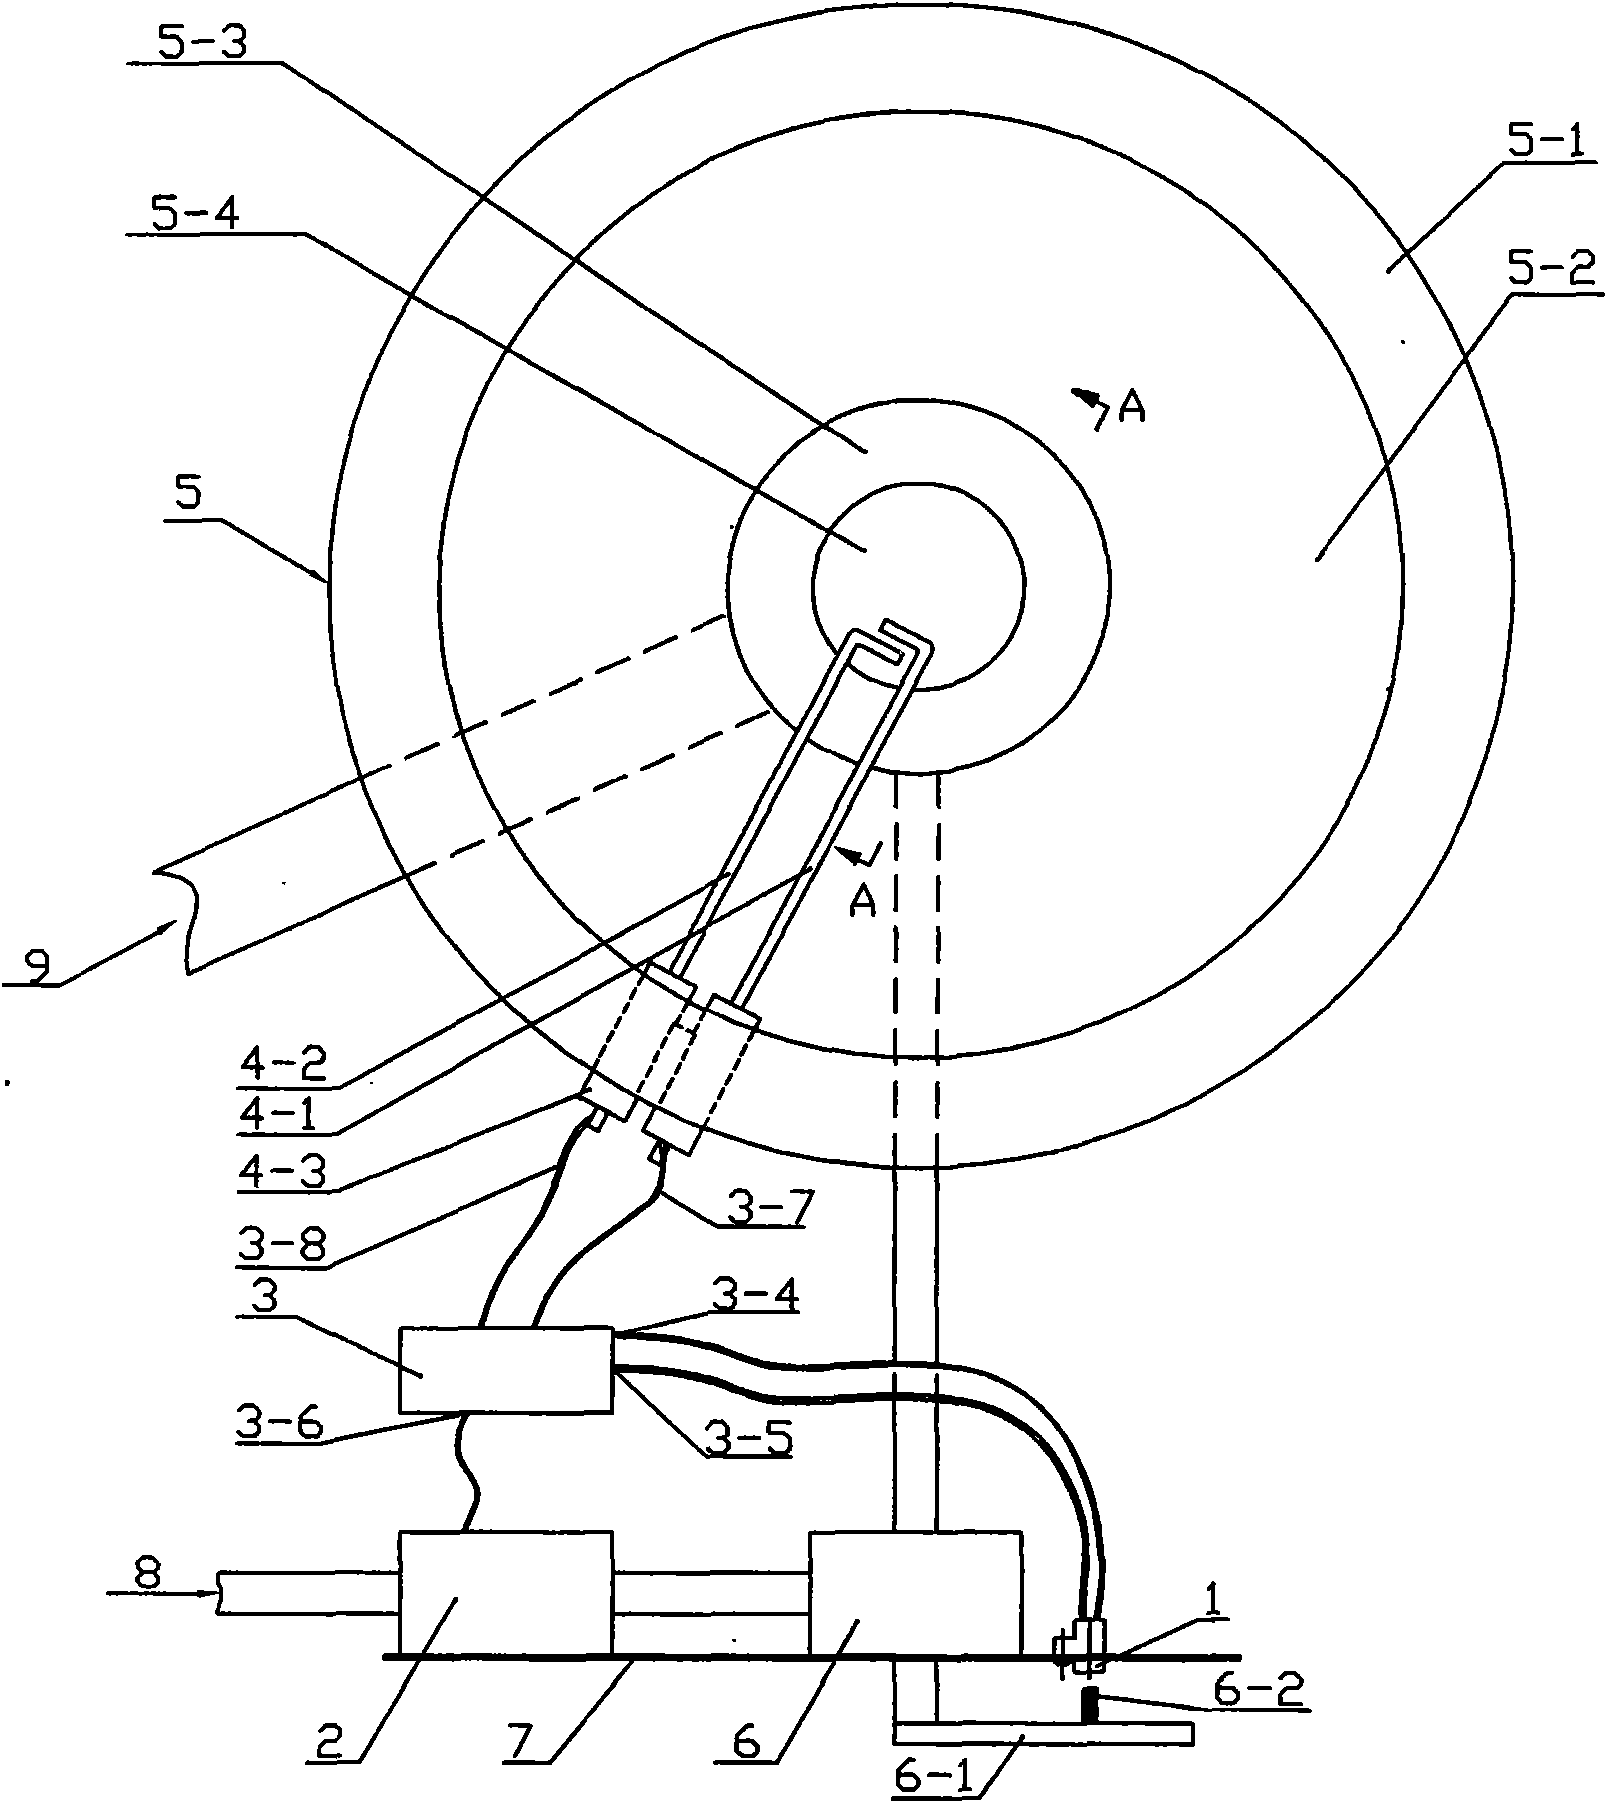 Protection device for automatic ignition and brennschluss of commercial gas furnace